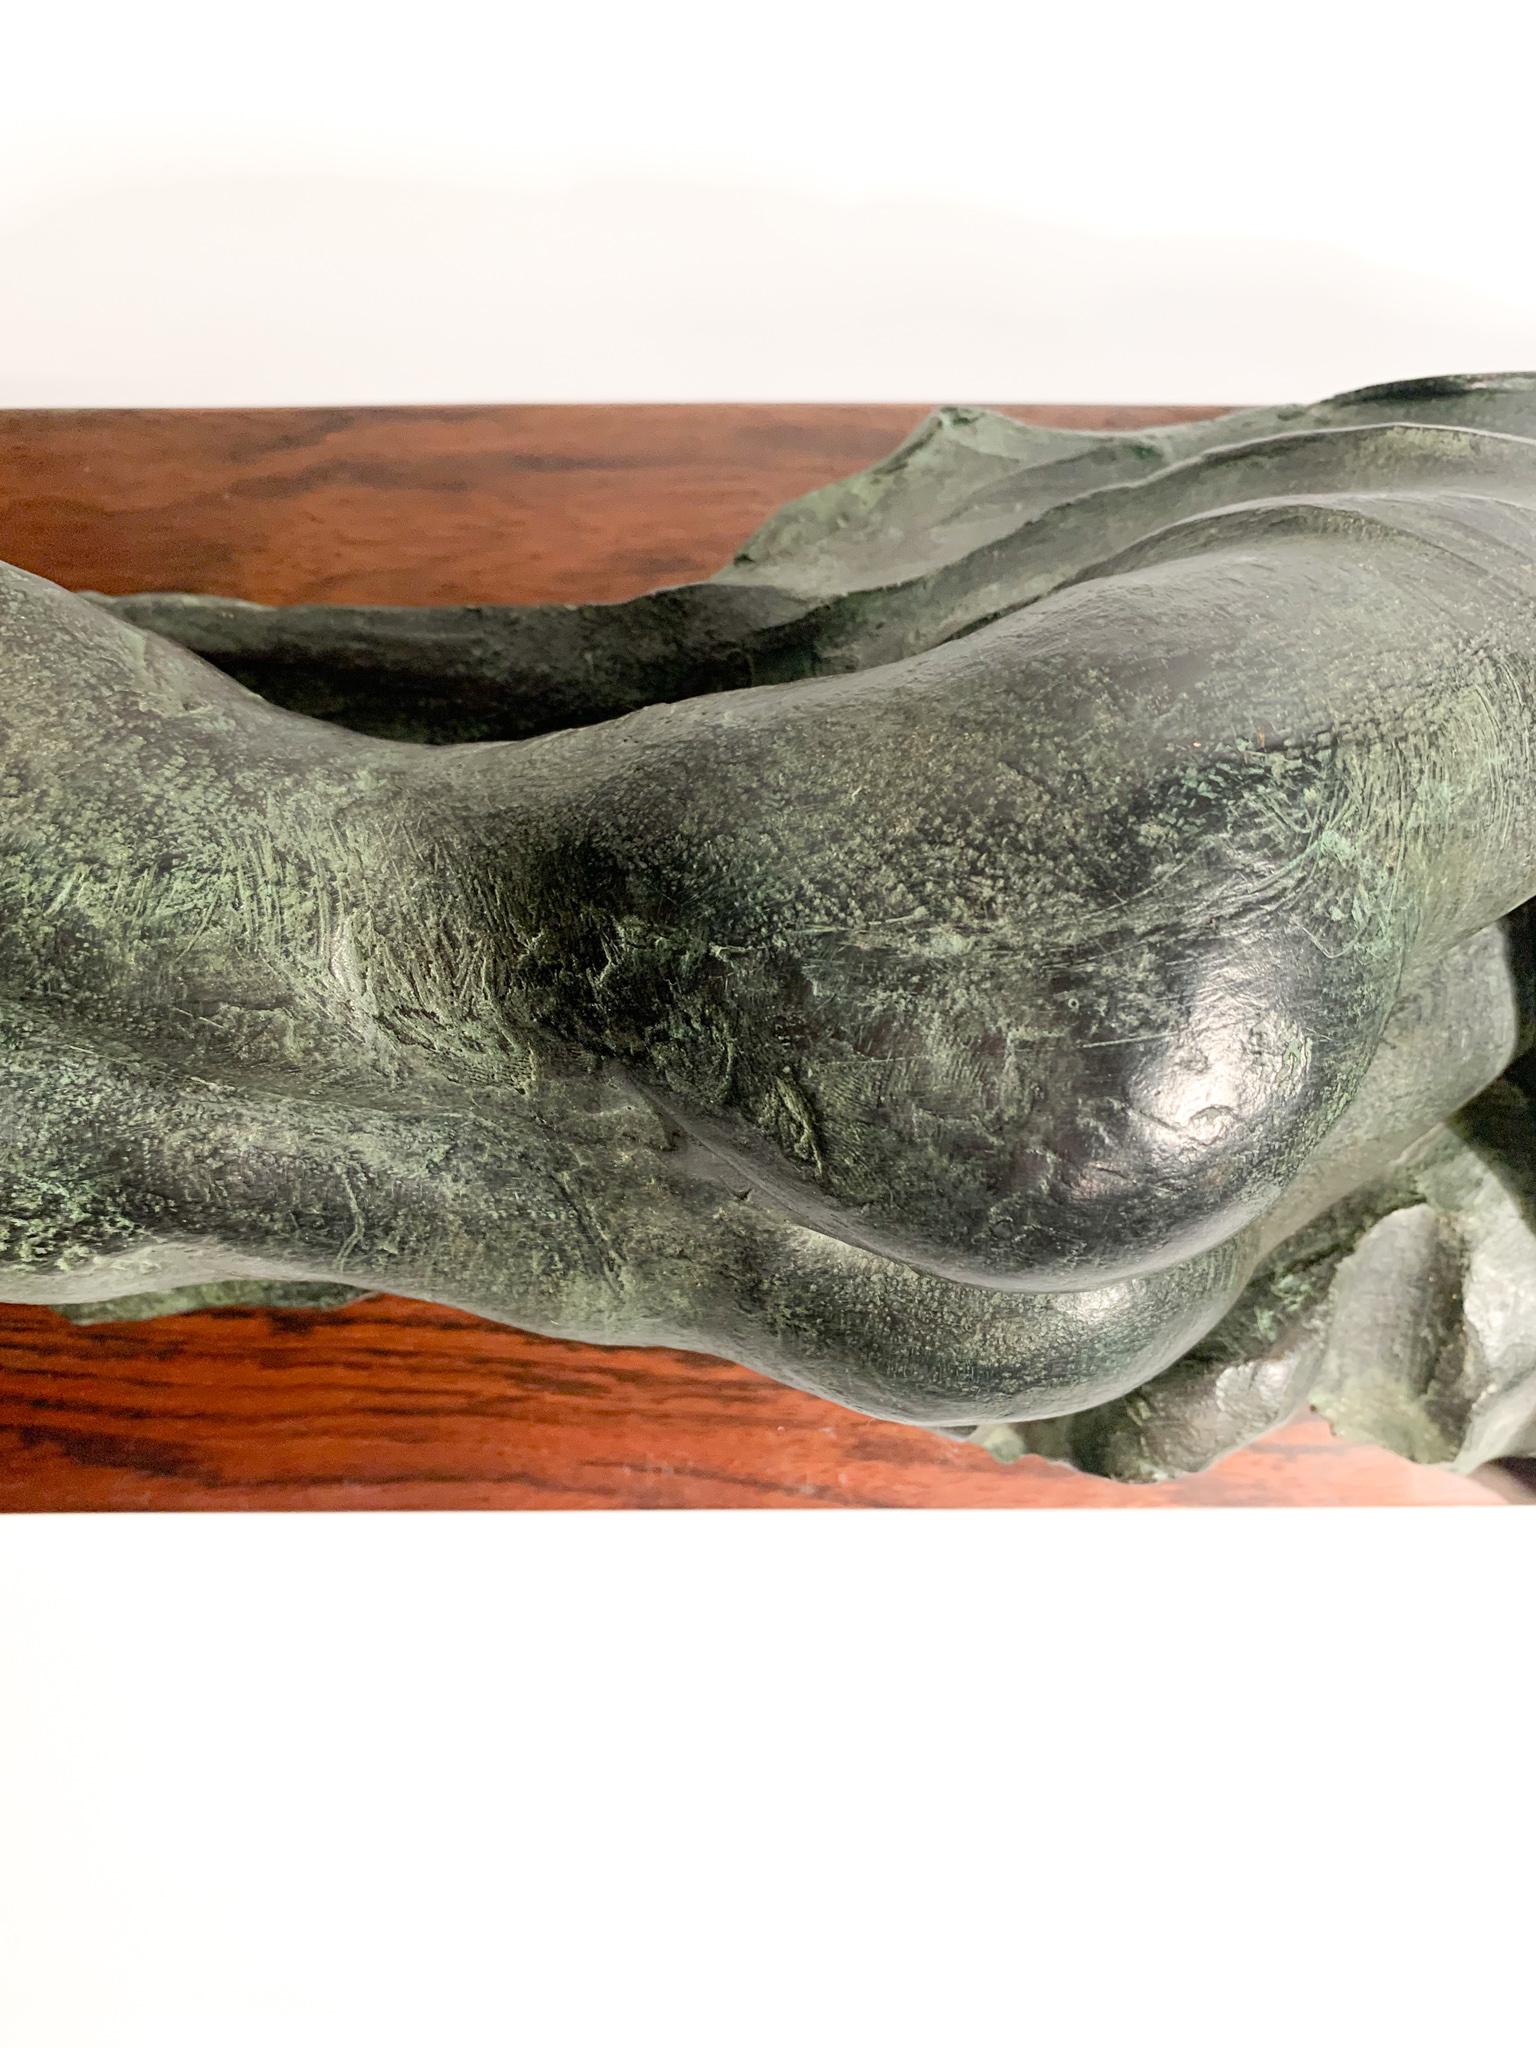 Italian Bronze Sculpture of a Female Nude by Michele Zappino from the 1990s For Sale